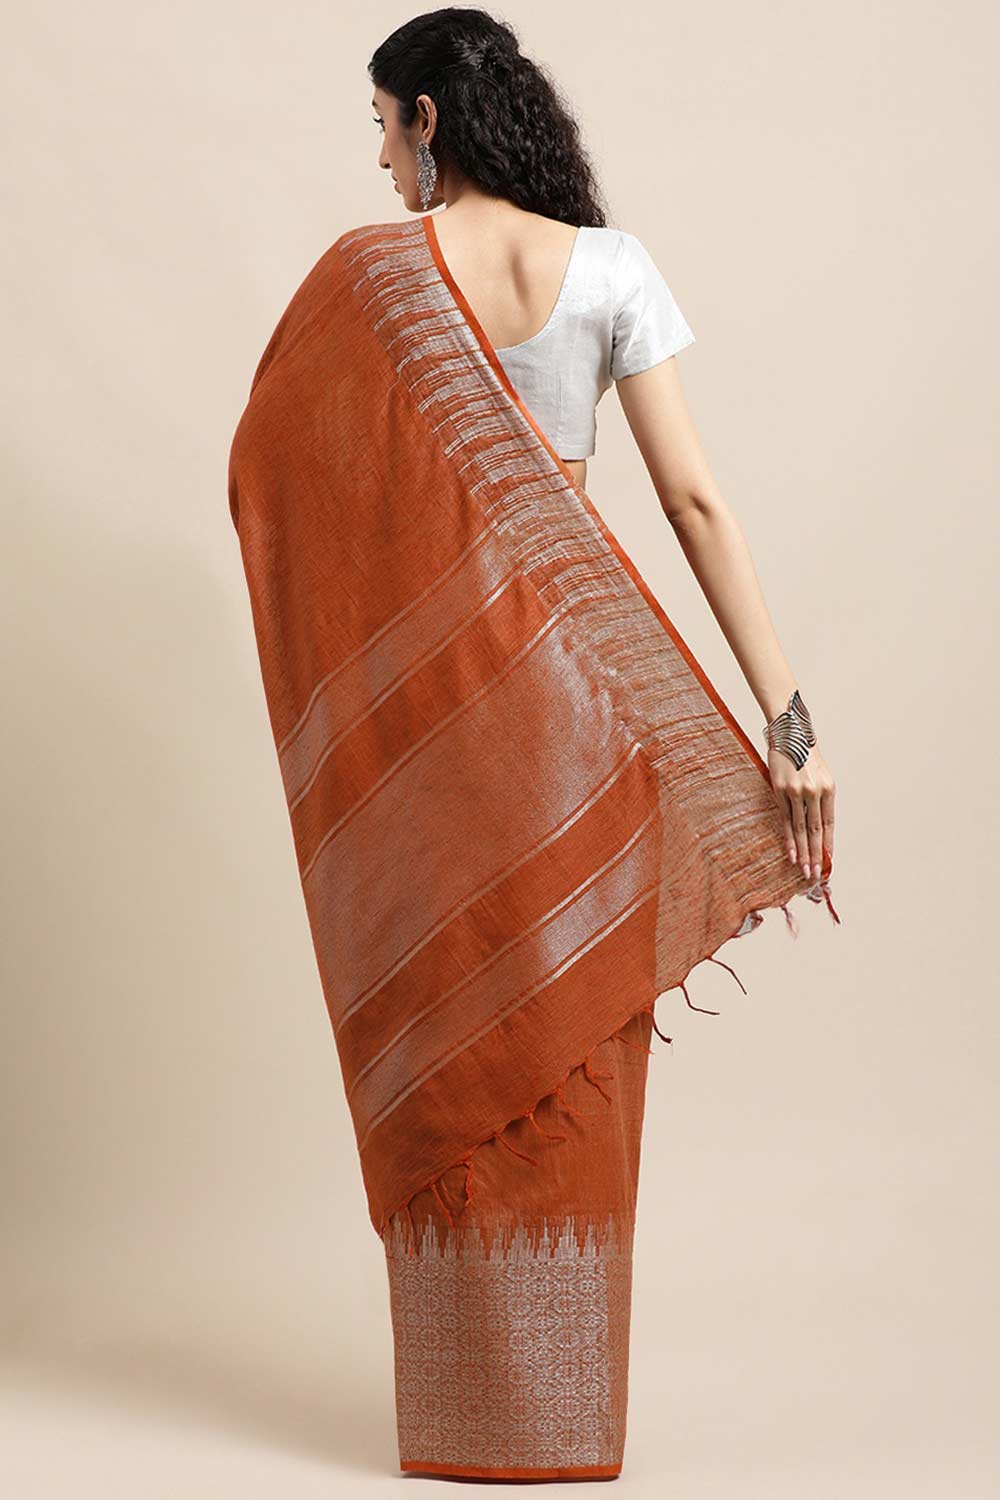 Shop Ronnie Rust Zari Woven Silk Blend One Minute Saree at best offer at our  Store - One Minute Saree